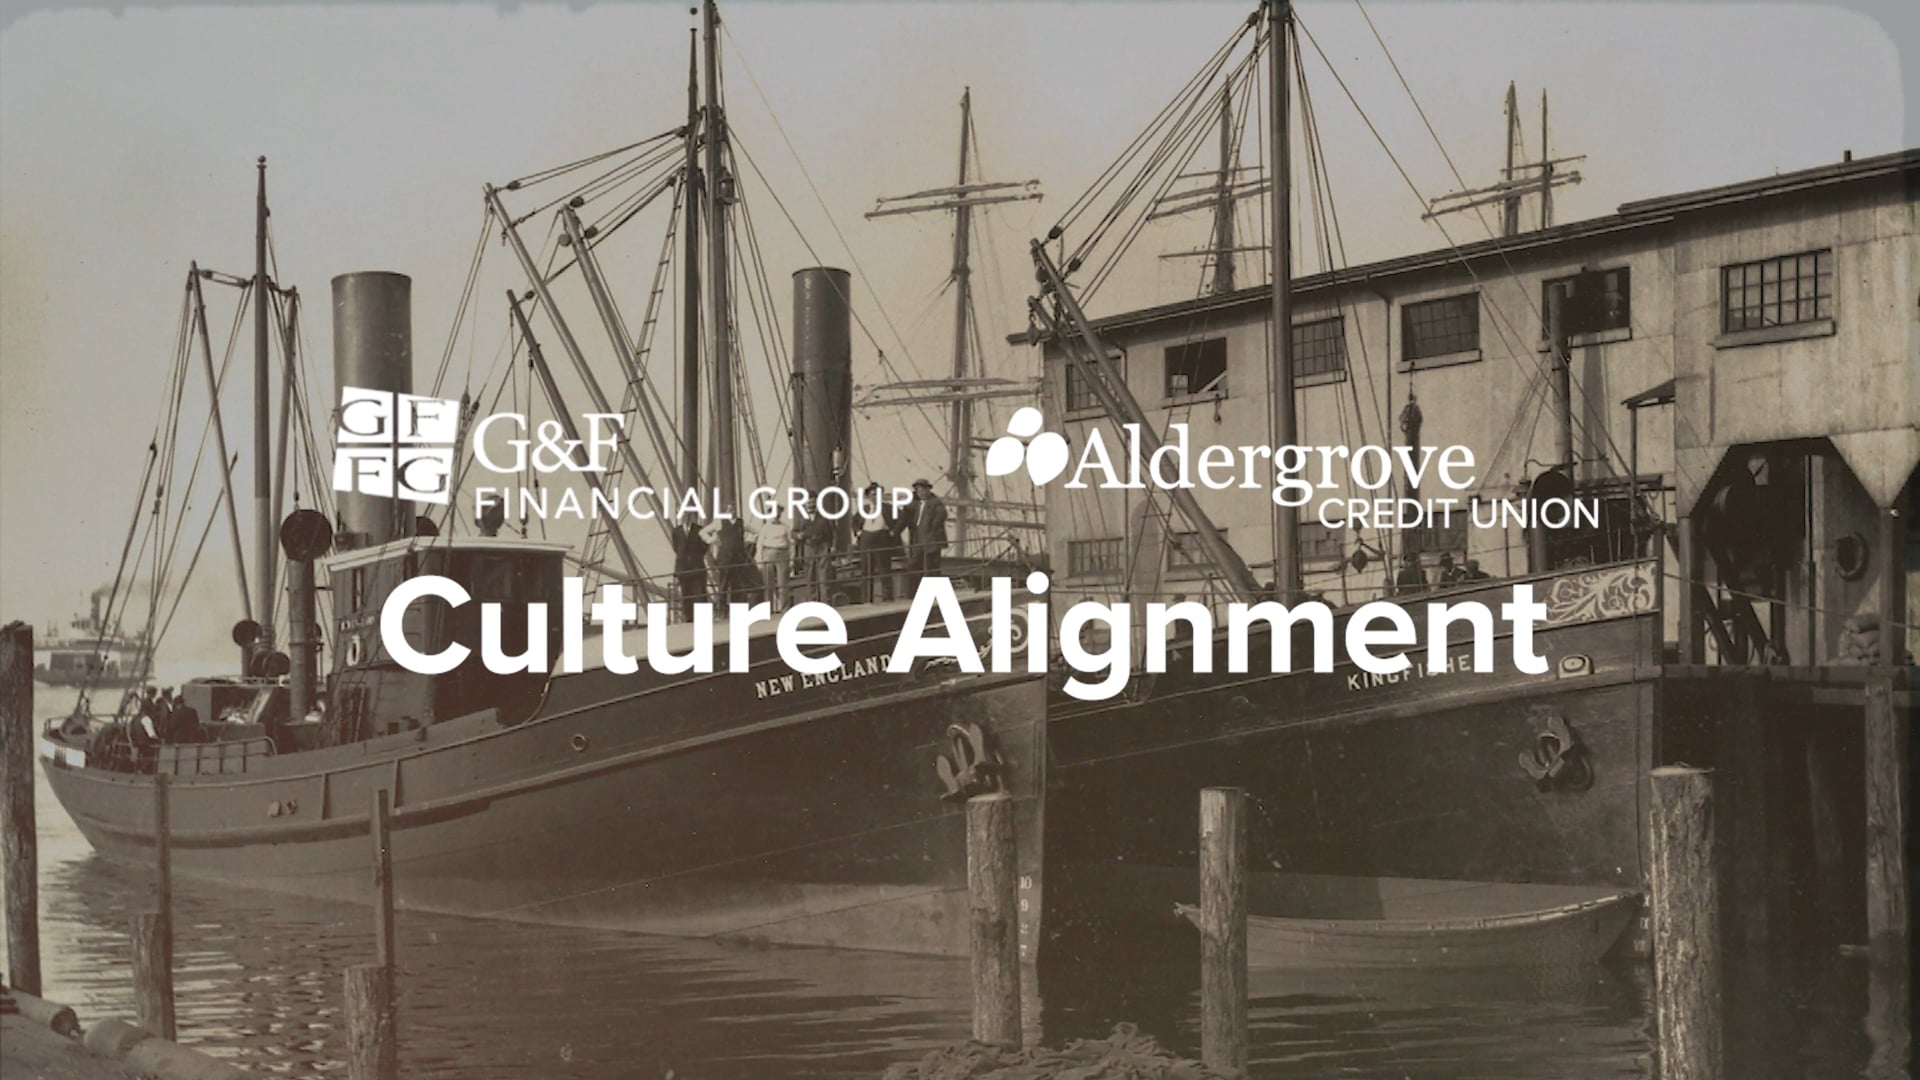 Cultural Alignment  | Aldergrove Credit Union and G&F Financial Group